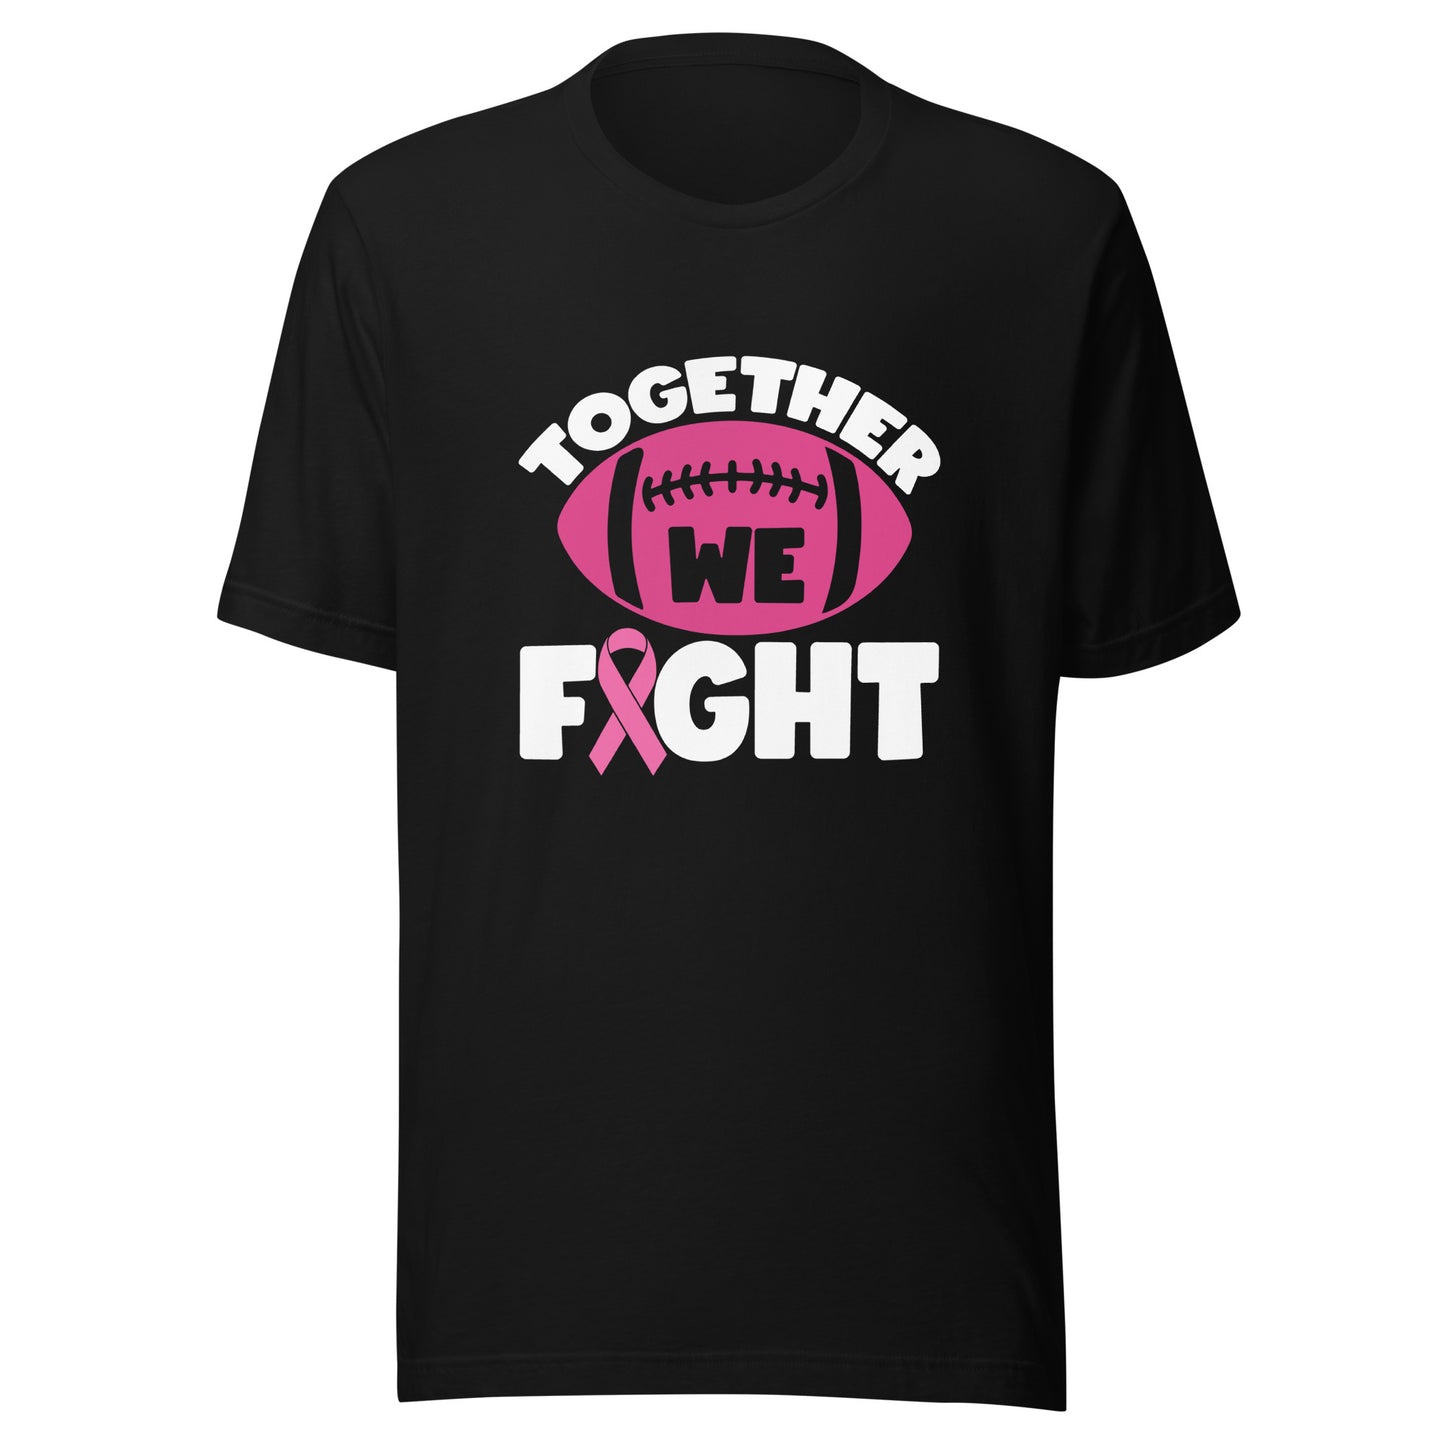 Together We Fight Football Breast Cancer Awareness Support Pink Ribbon Sport Unisex T-shirt